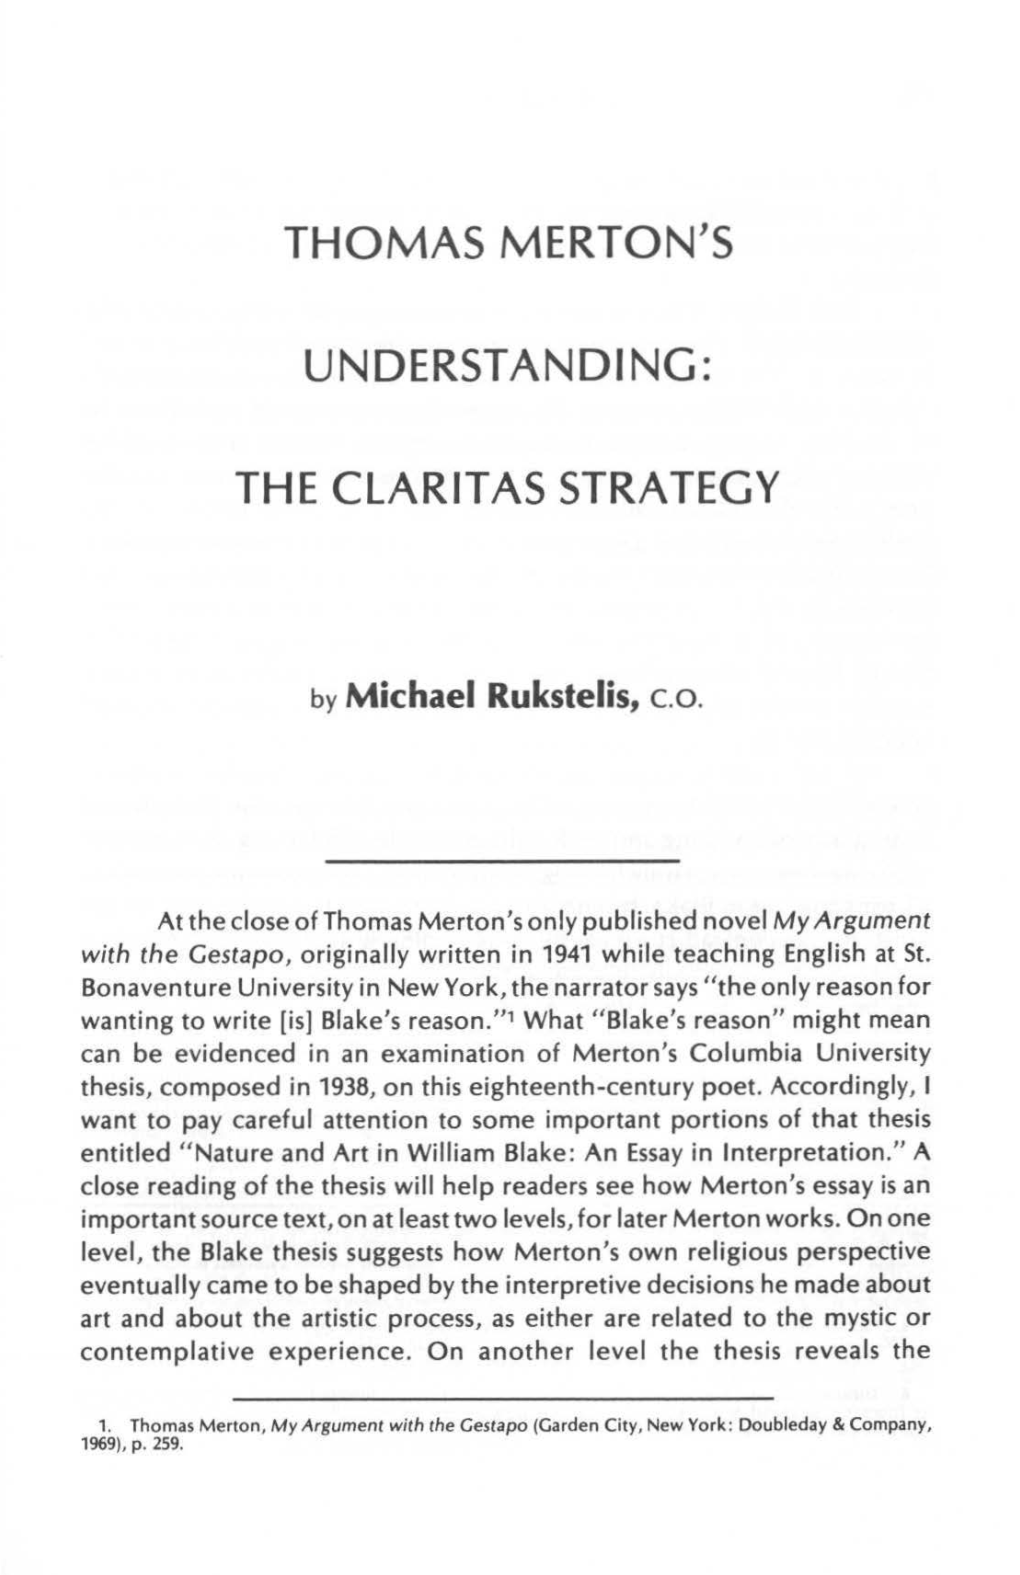 The Claritas Strategy